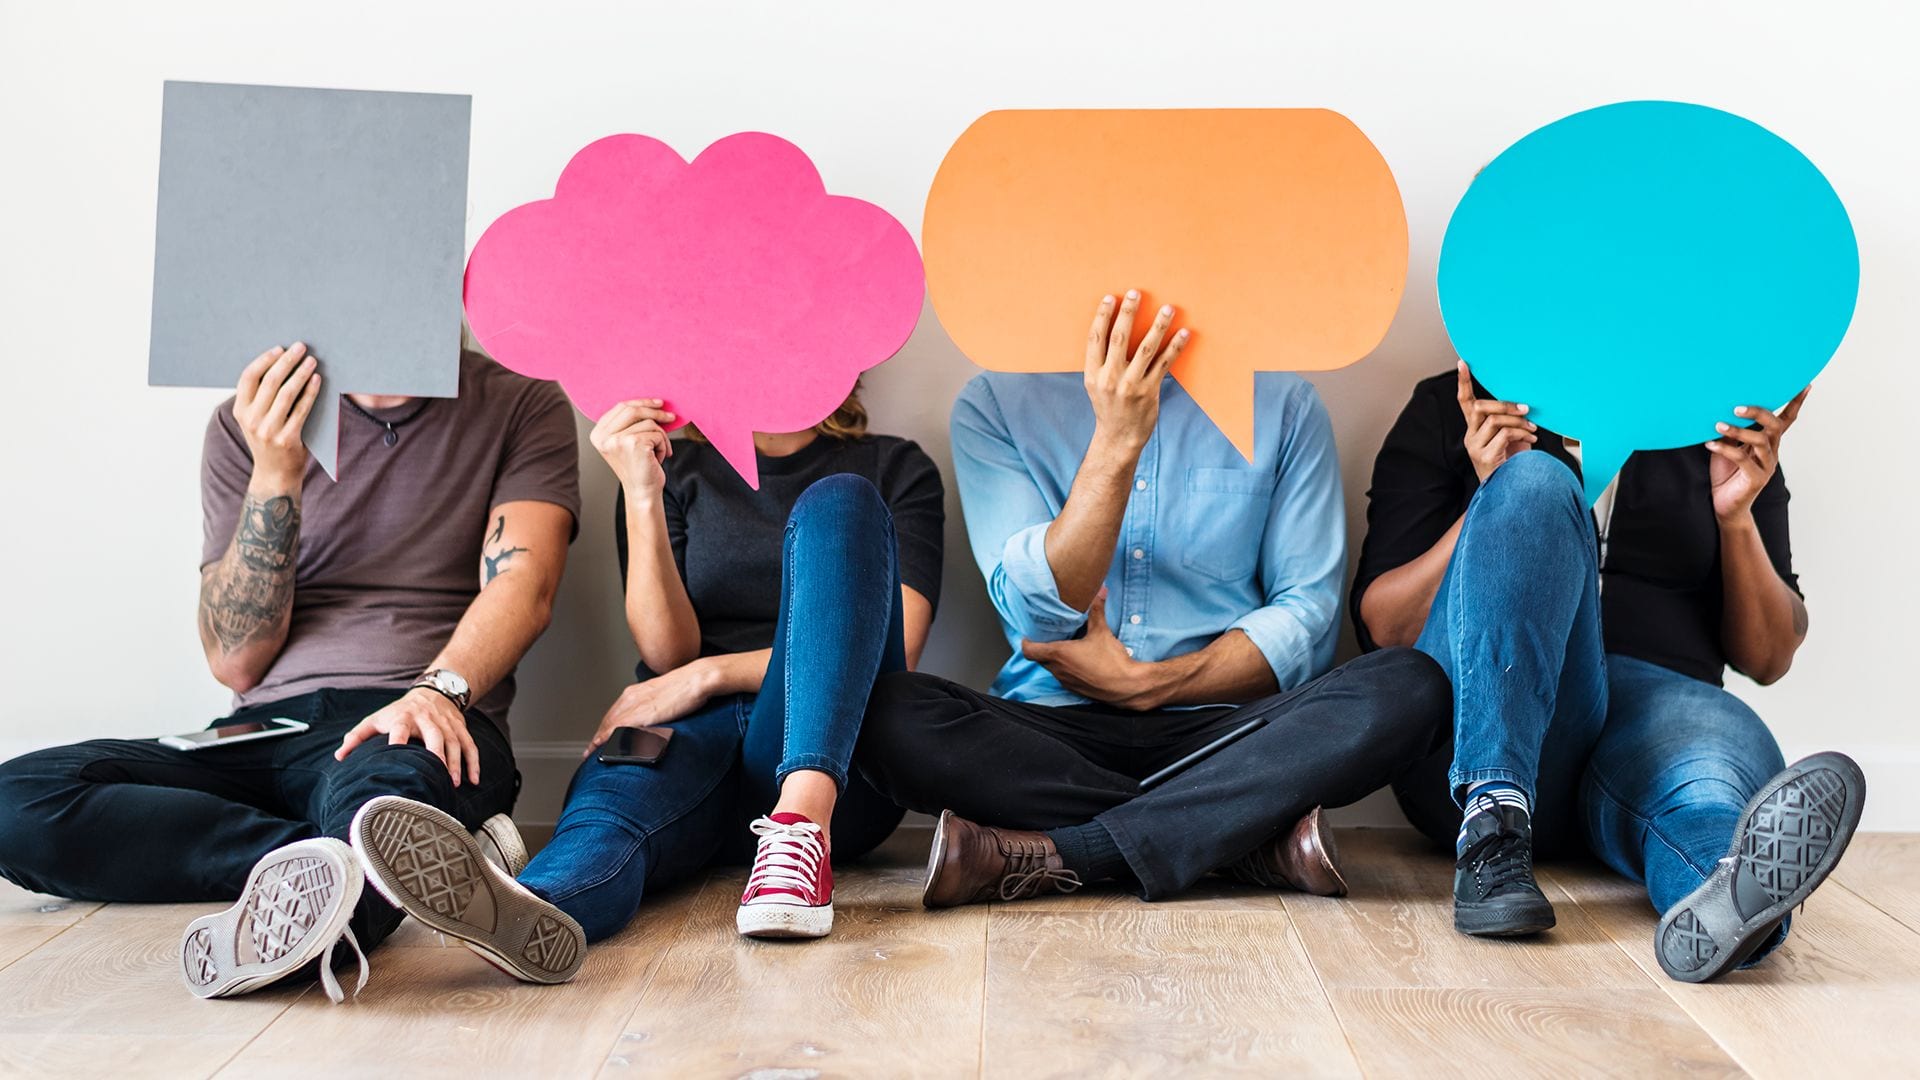 4 reasons why PR is crucial people sitting with speech bubbles over their face to symbolize brand awareness.